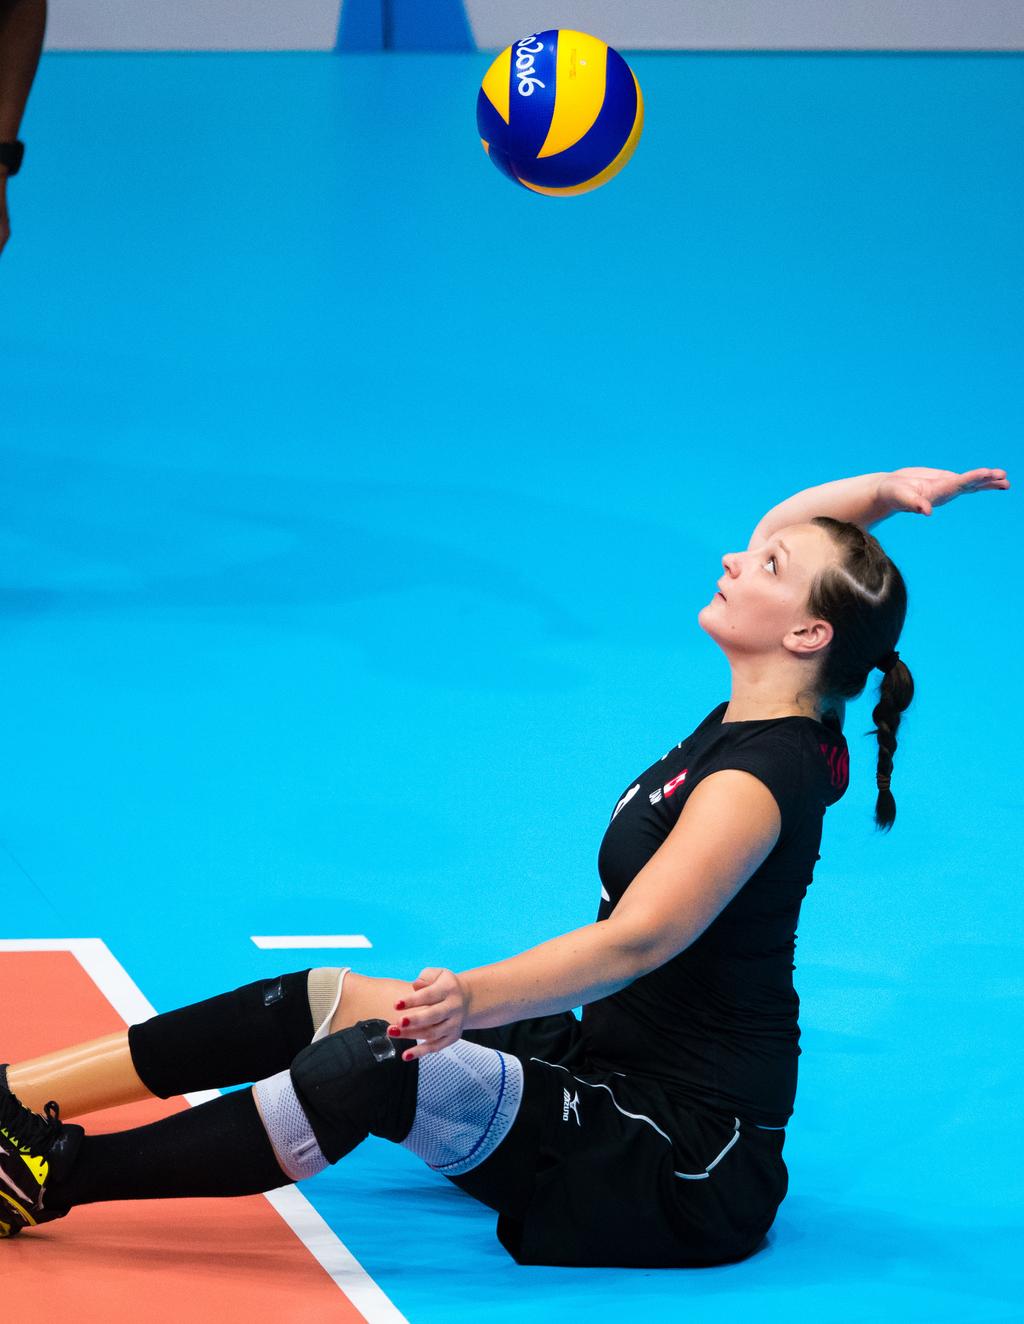 Sitting Volleyball Skills Ready Positions There are two ready positions commonly used in sitting volleyball depending on the situation presented.